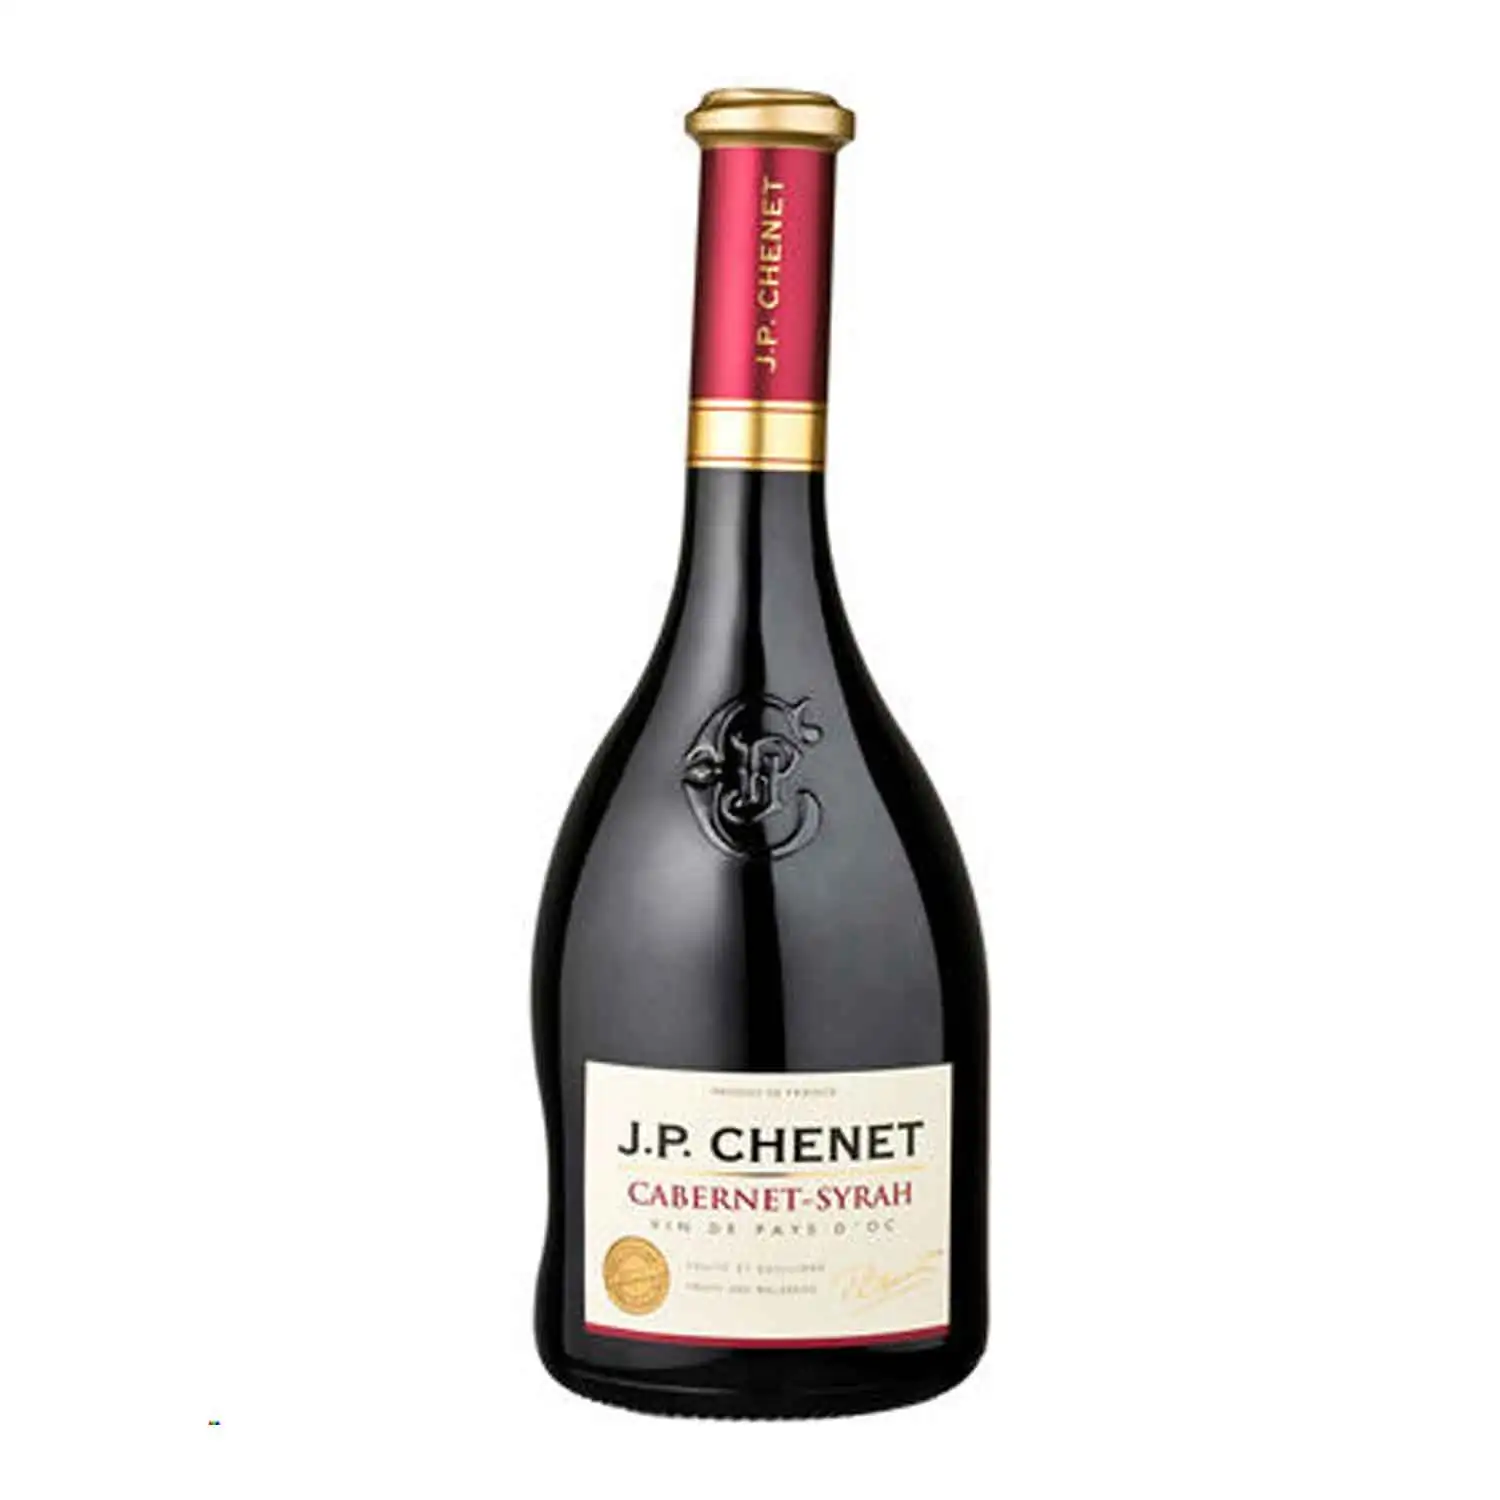 JP Chenet cabernet-syrah 75cl Alc 13% - Buy at Real Tobacco